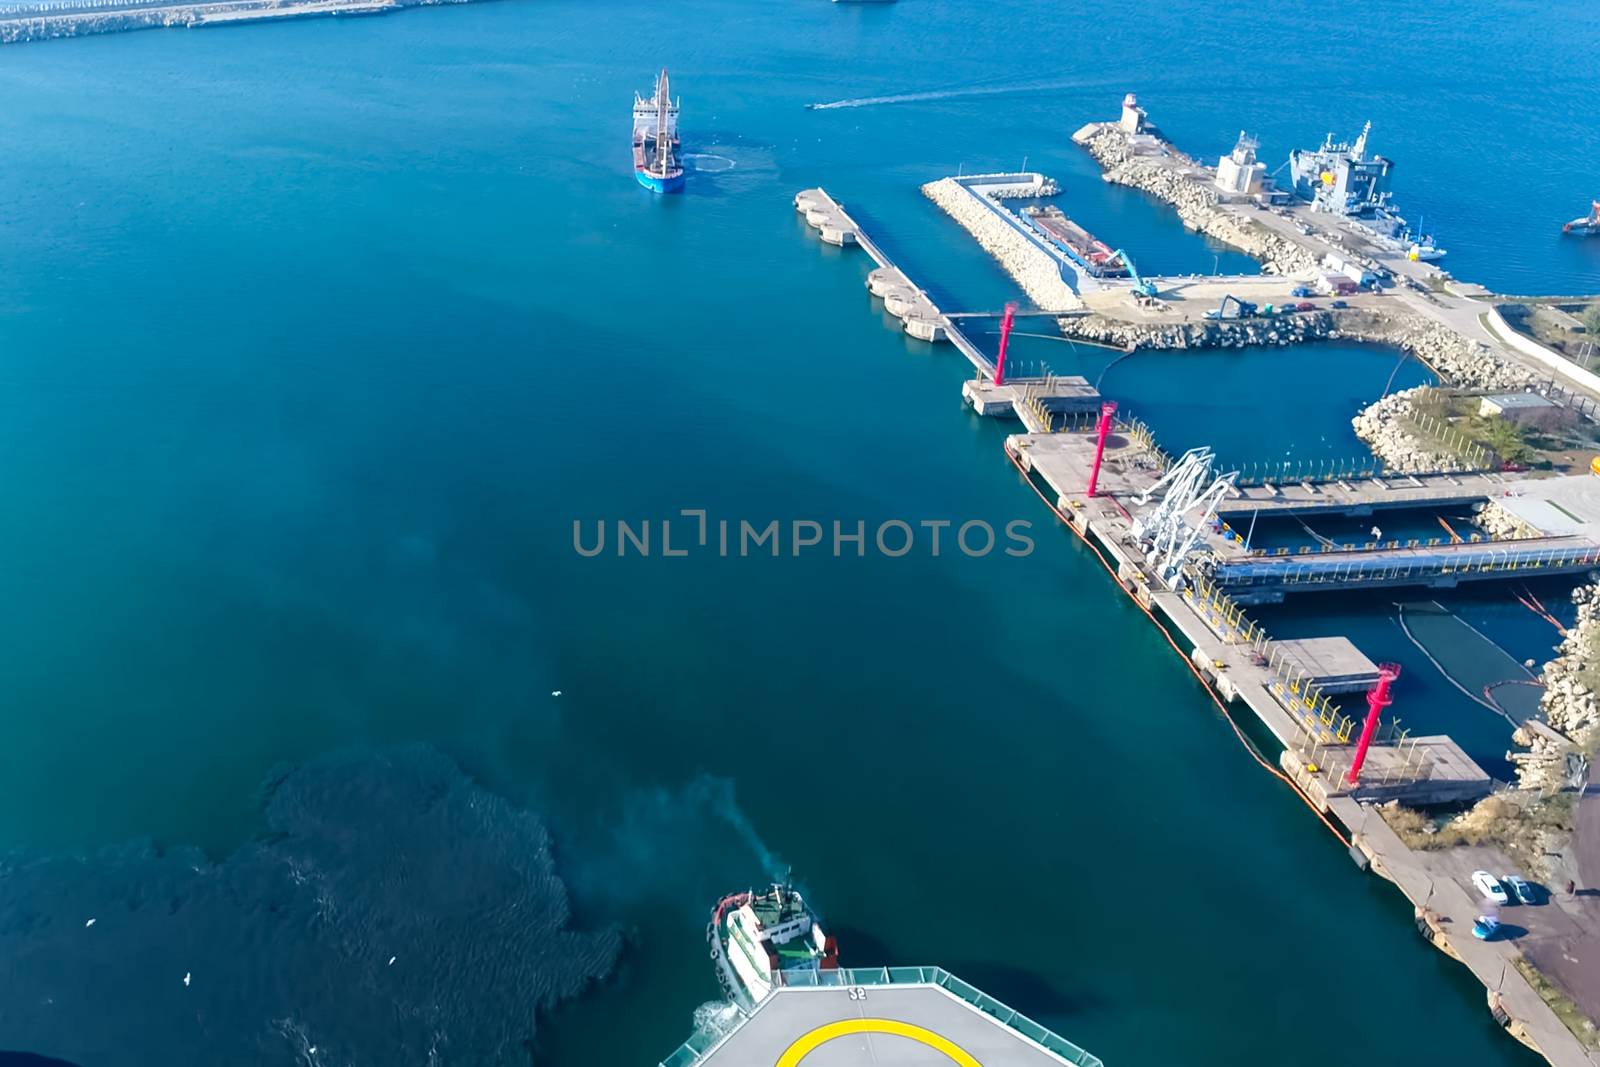 Drilling platform in the port. Towing of the oil platform by nyrok